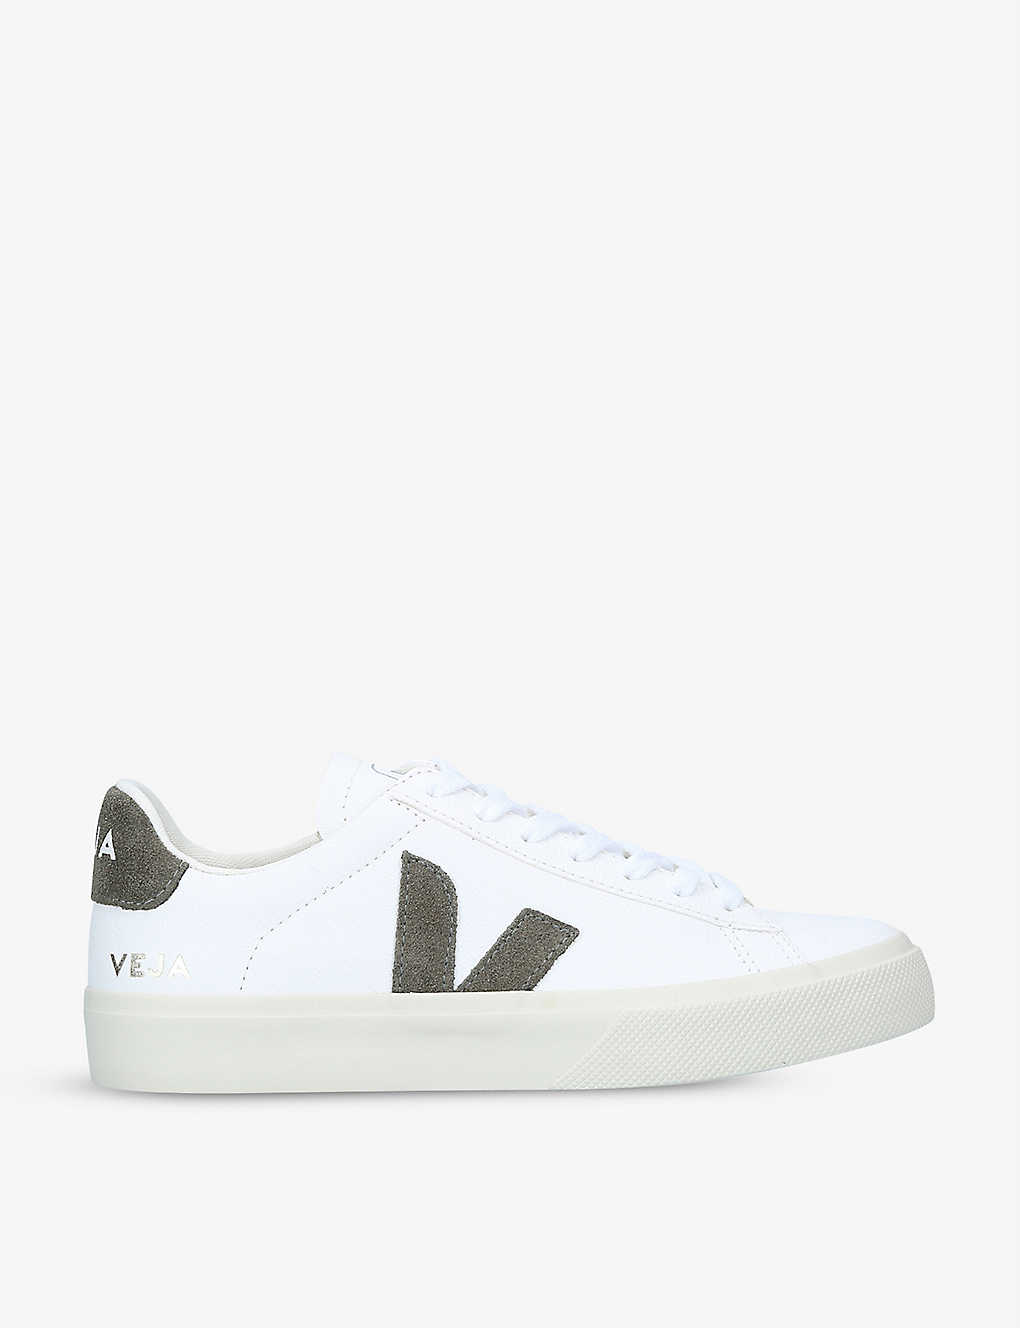 Shop Veja Women's White/oth Women's Campo Chromefree Leather Trainers